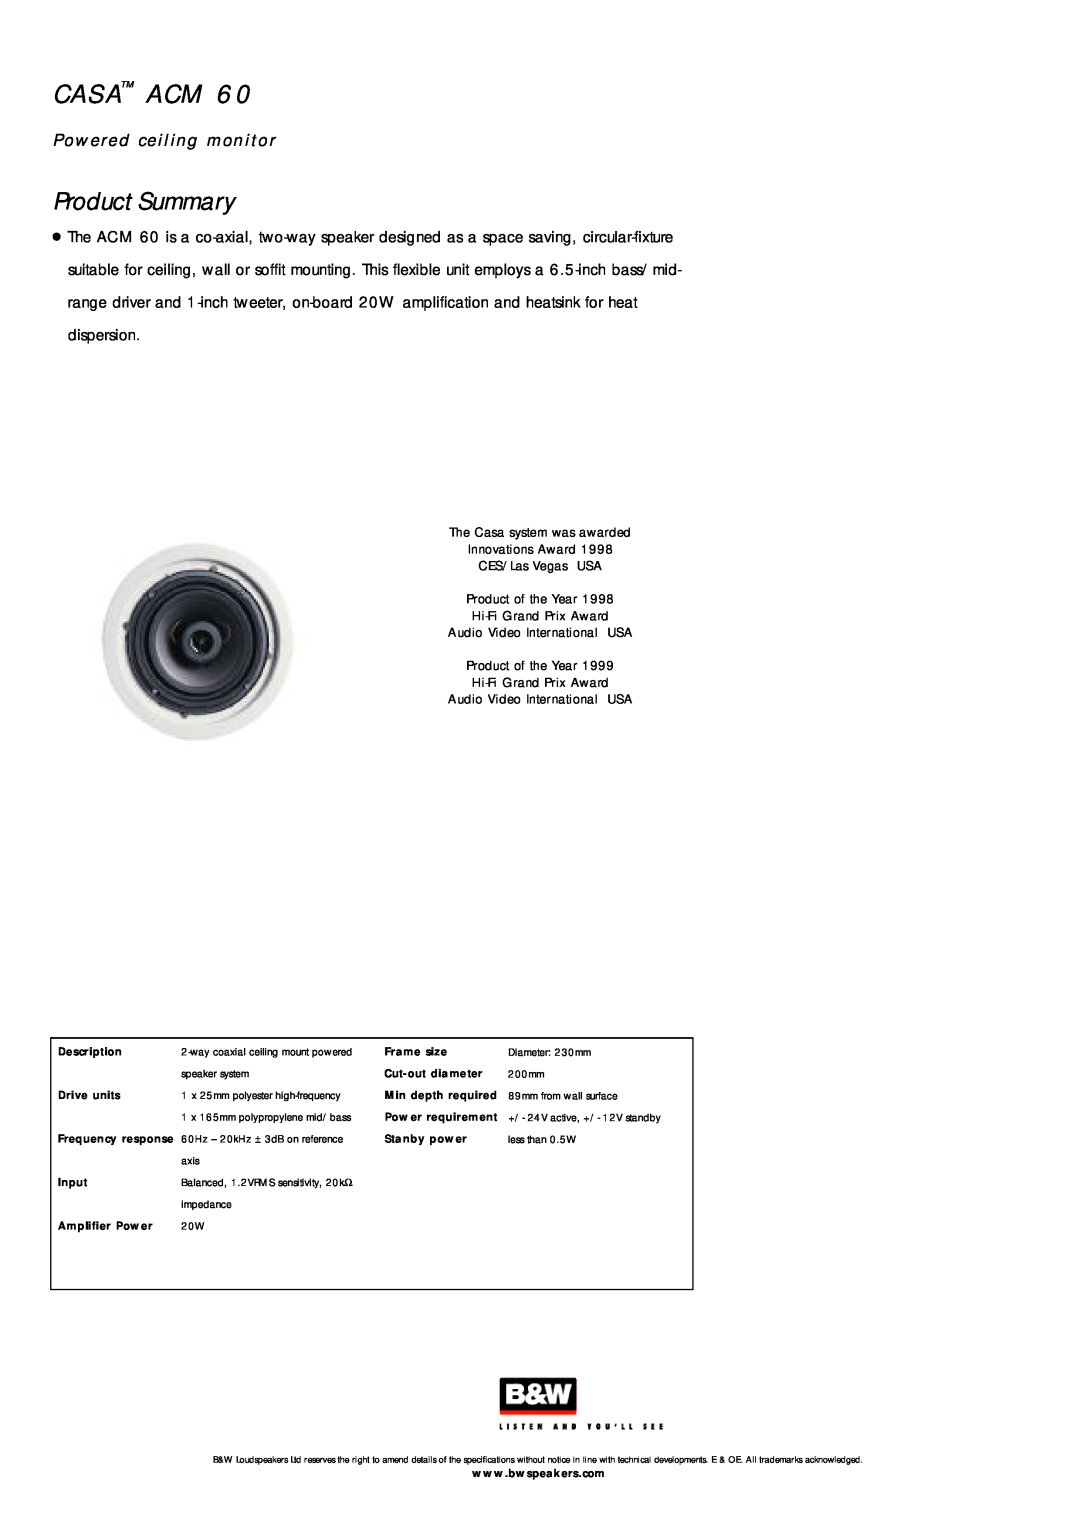 Bowers & Wilkins CASA ACM 60 specifications Ca Sa Acm, P o w e red ceiling mon itor Product Summary 